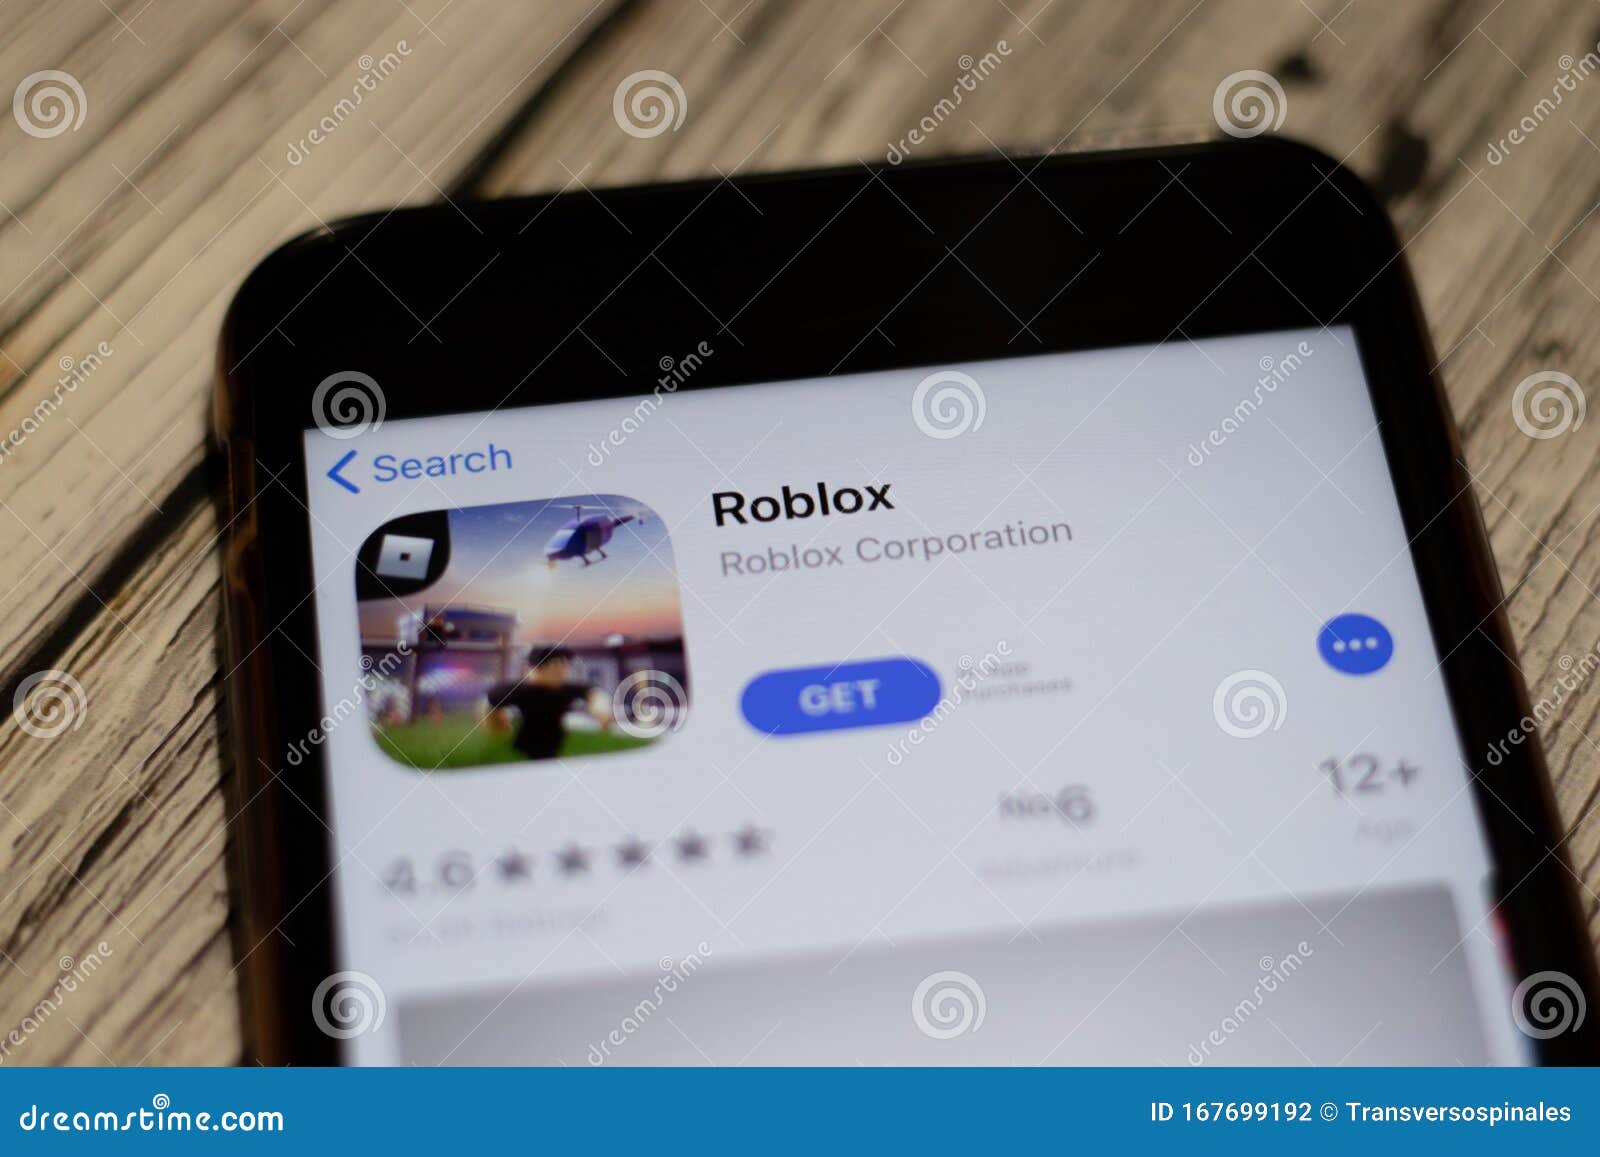 Saint Petersburg Russia 25 December 2019 Roblox Icon On App Store Page Close Up Top View On Phone Screen Editorial Photography Image Of Iphone Internet 167699192 - roblox ios iconpng roblox